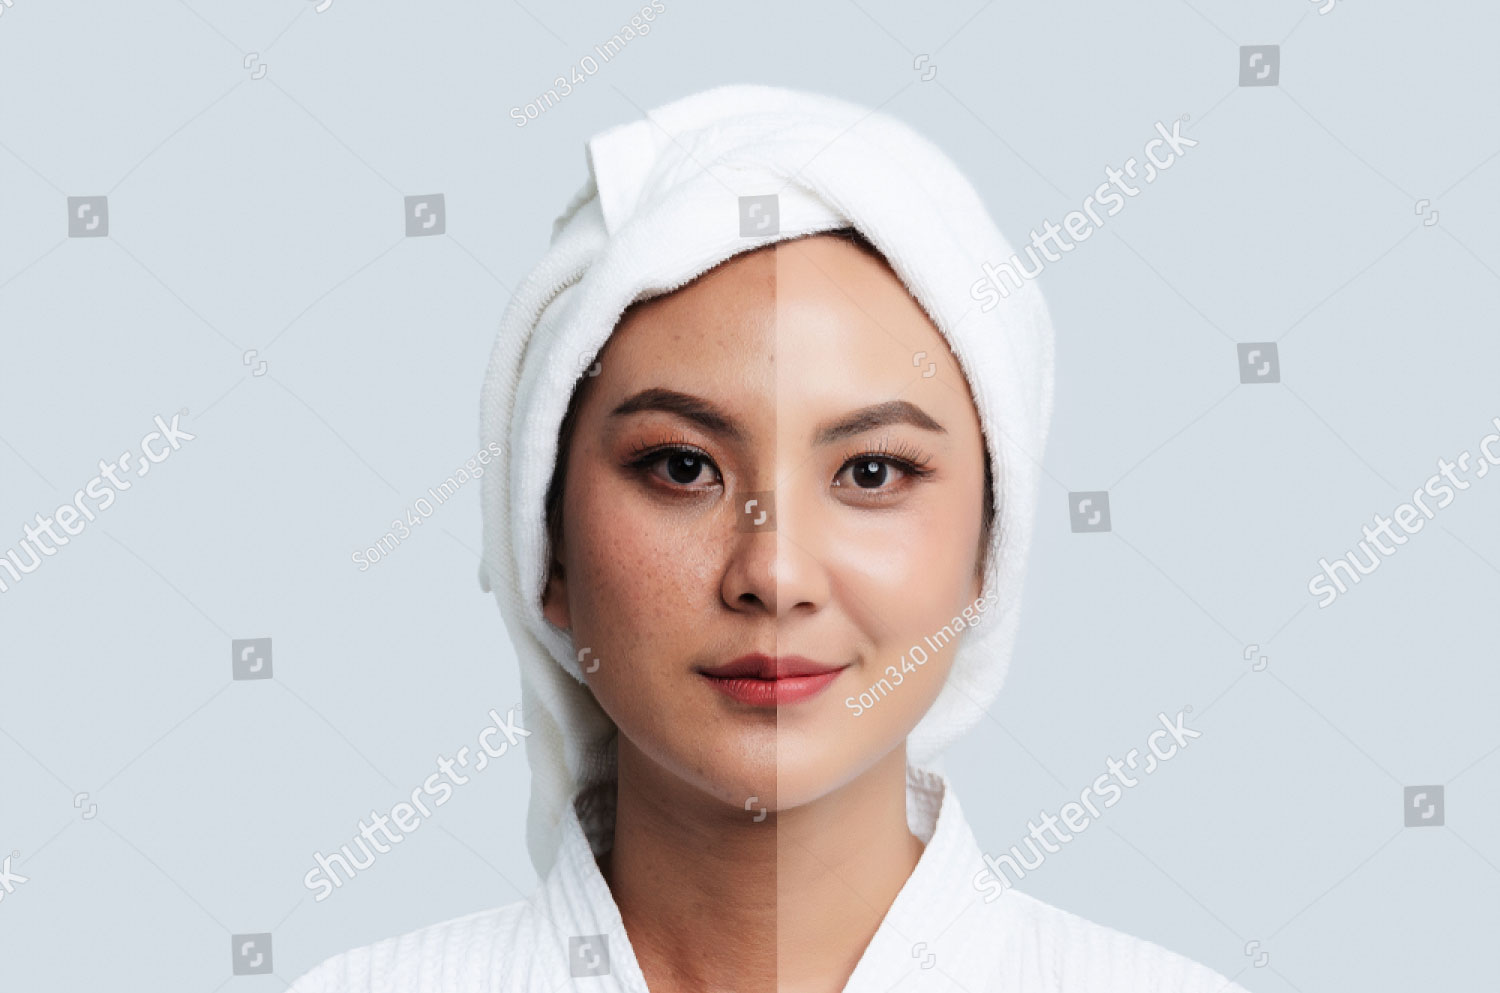 Comparison Portrait Of Beautiful Asian Woman Dark Spots And New Skin Before After Skin Care And 1389609878 